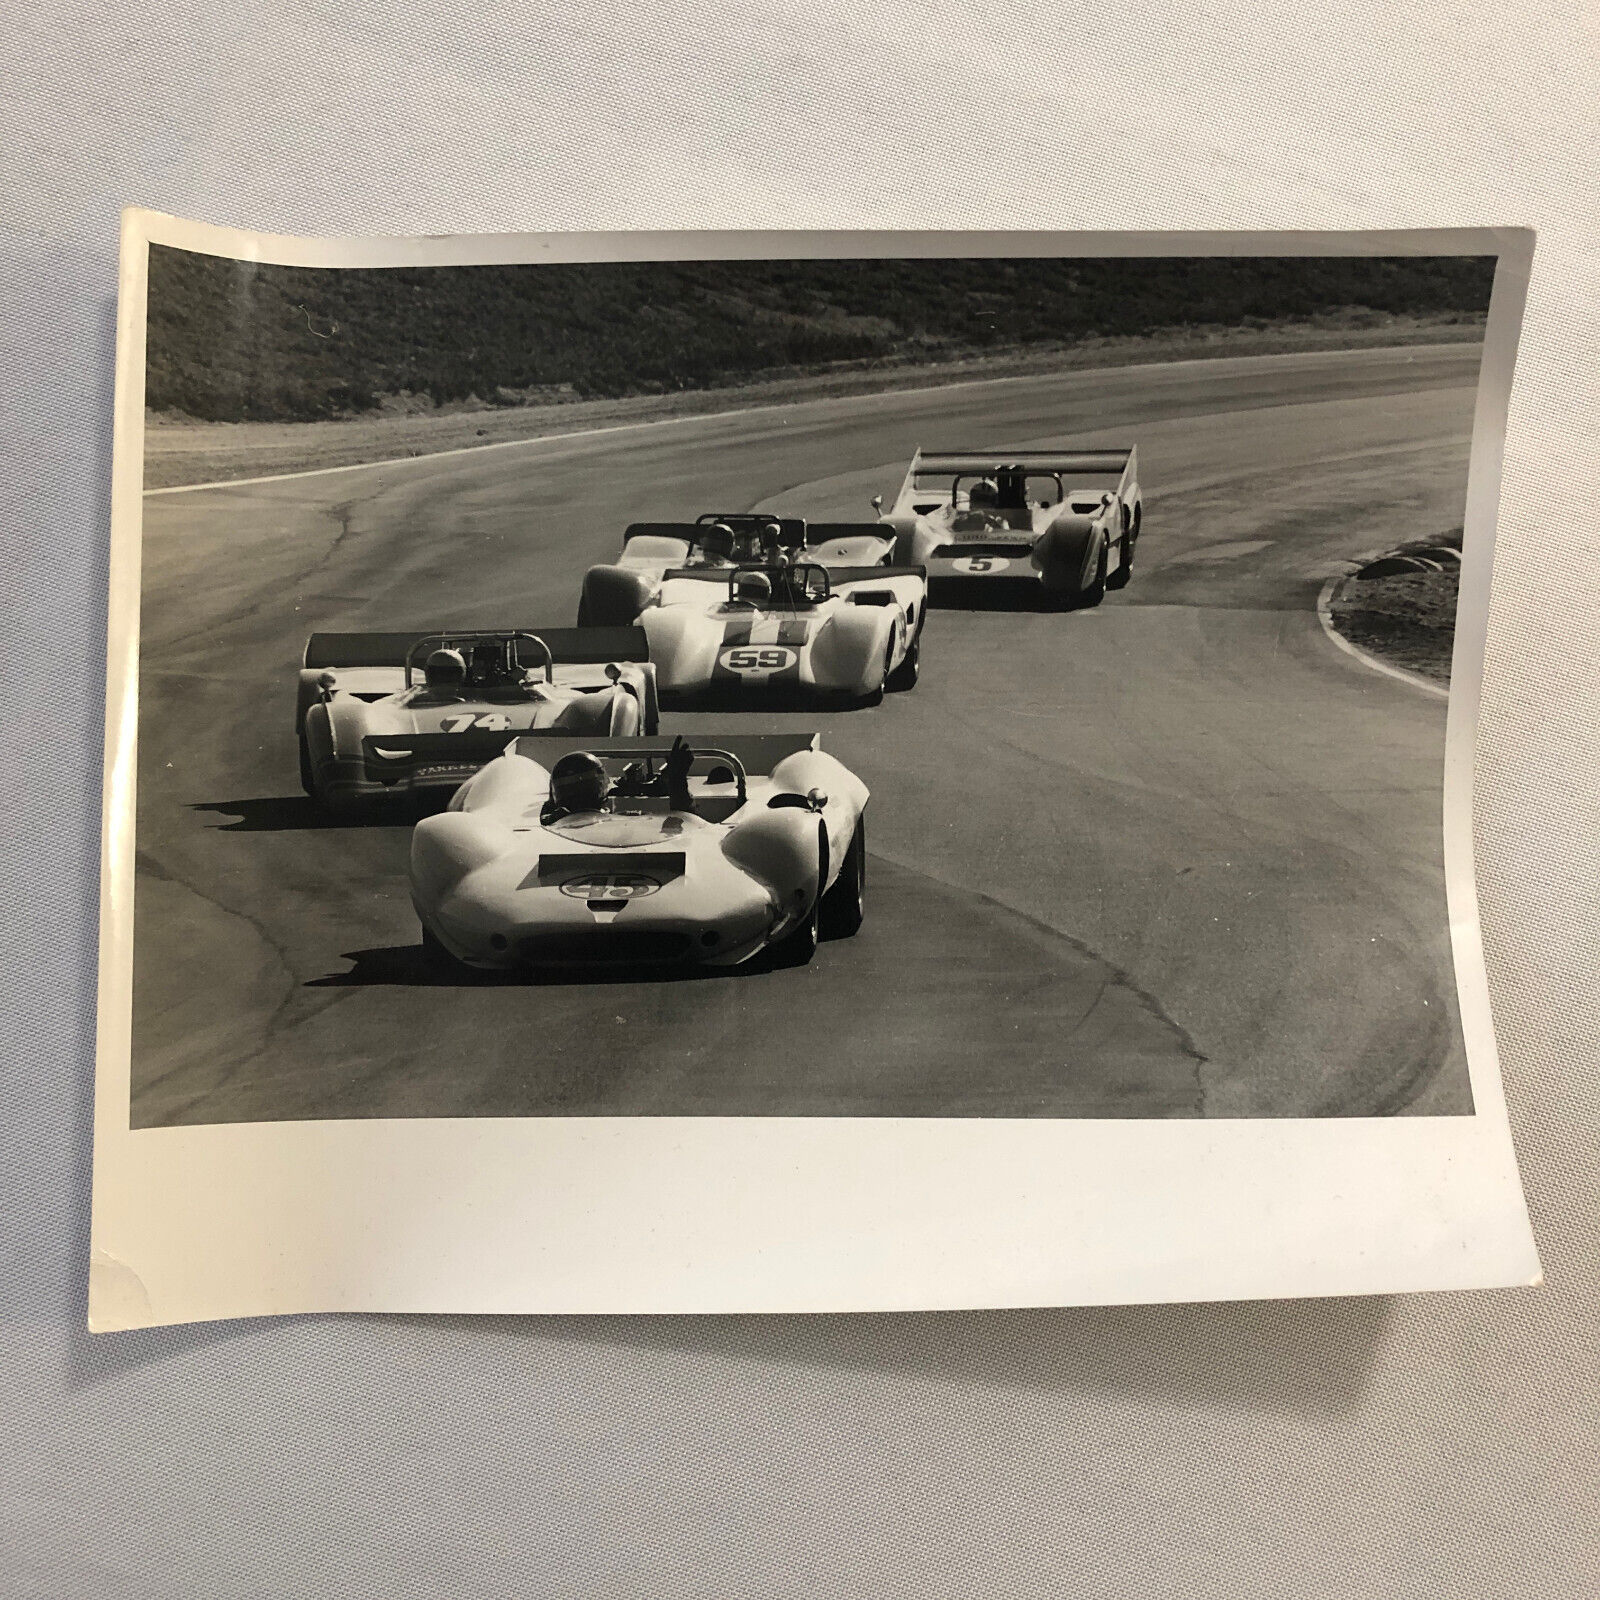 Vintage Racing Photo Photograph Can AM CanAm Riverside Times Race Denny Hulme +